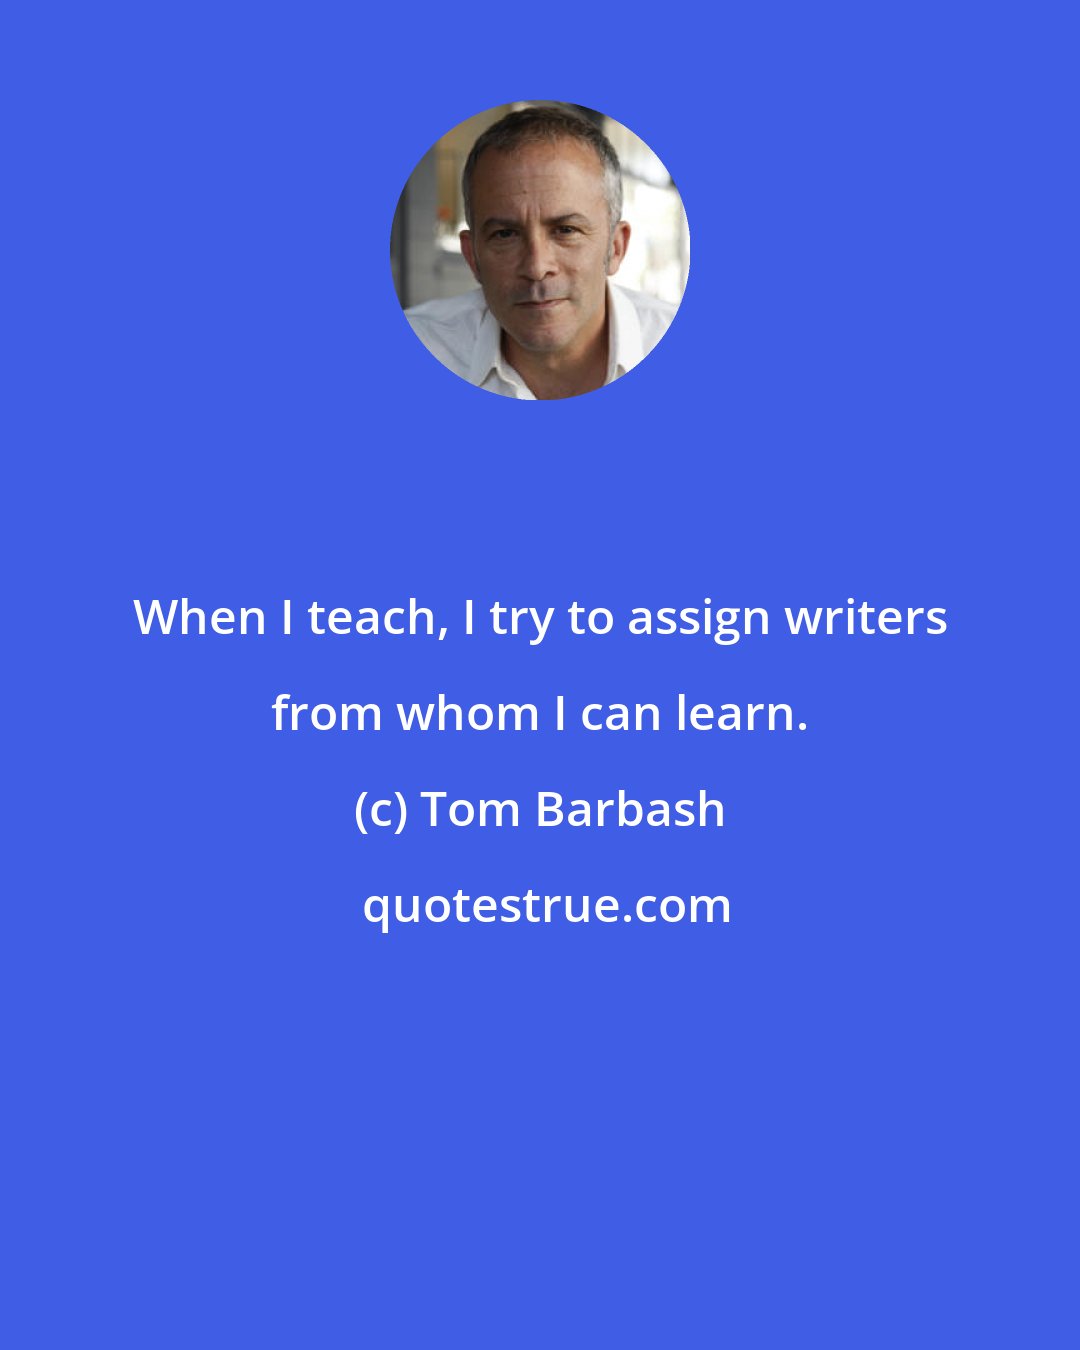 Tom Barbash: When I teach, I try to assign writers from whom I can learn.